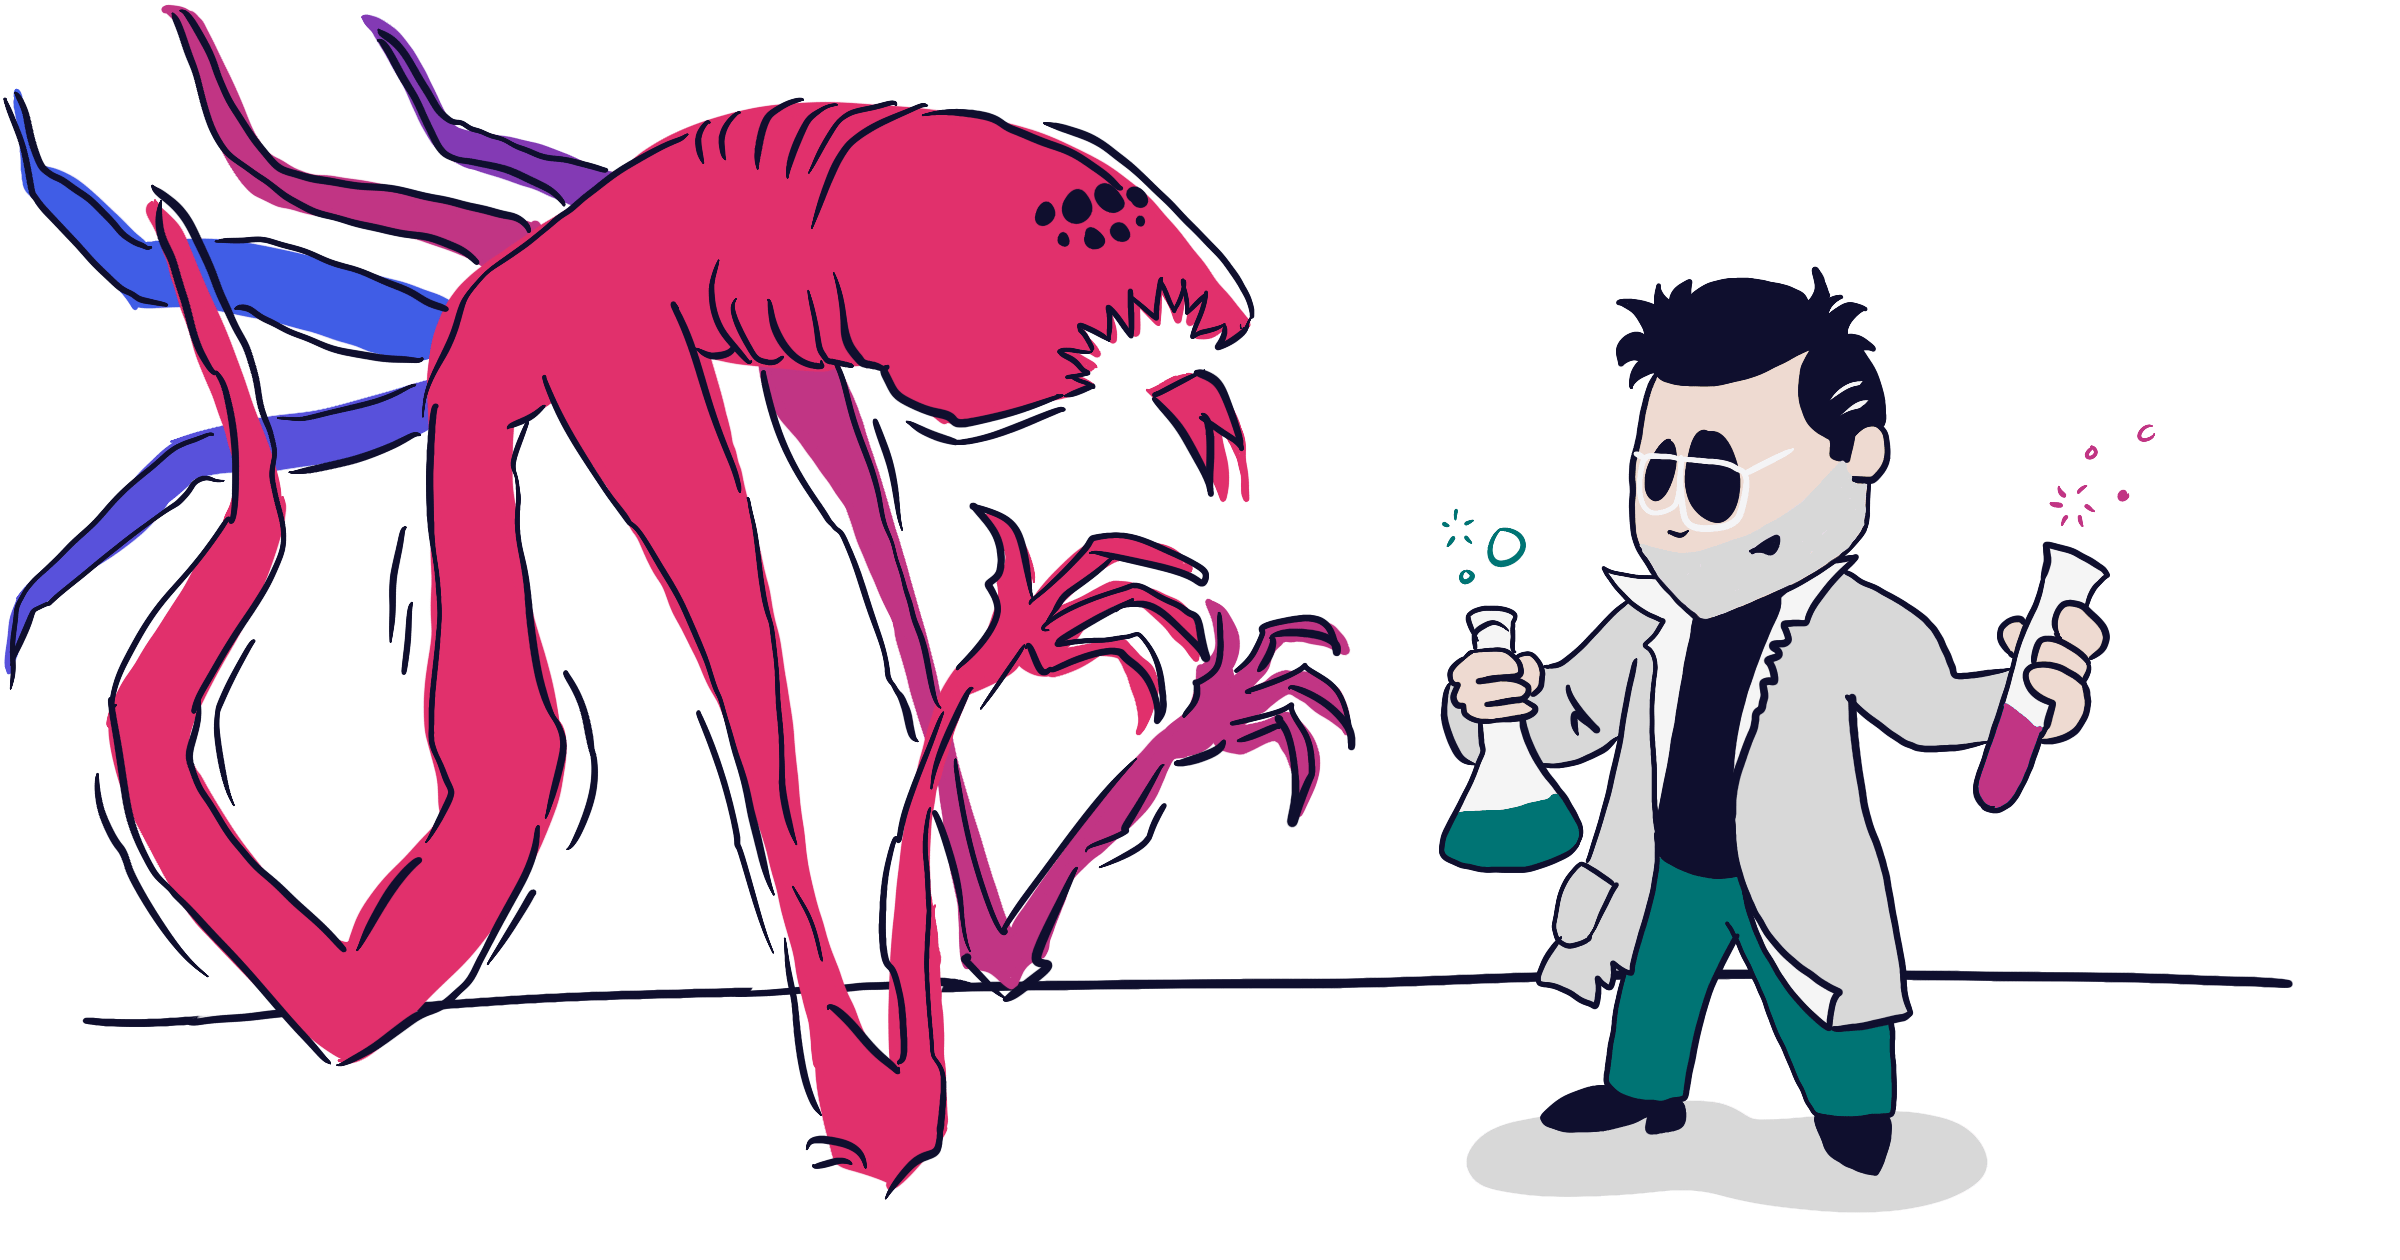 Cartoon-version of Carlos Eriksson dressed as a scientist, experimenting with a giant multicoloured spider-monster.